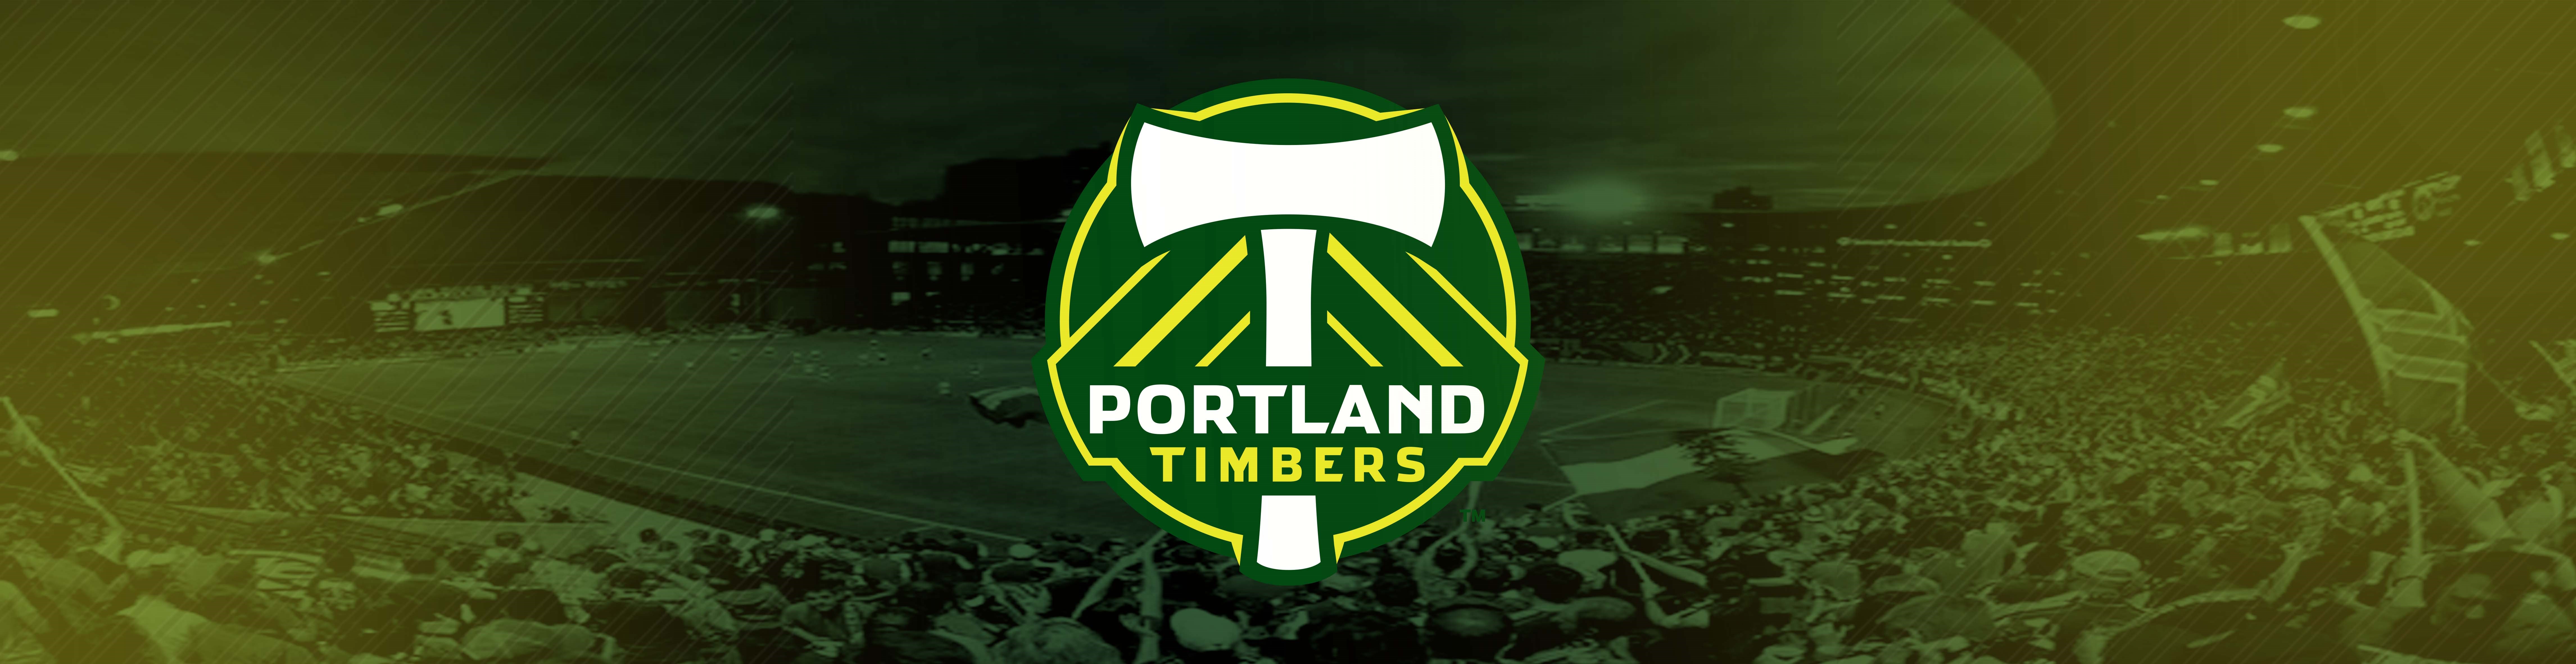 Images of Portland Timbers | 9167x2363